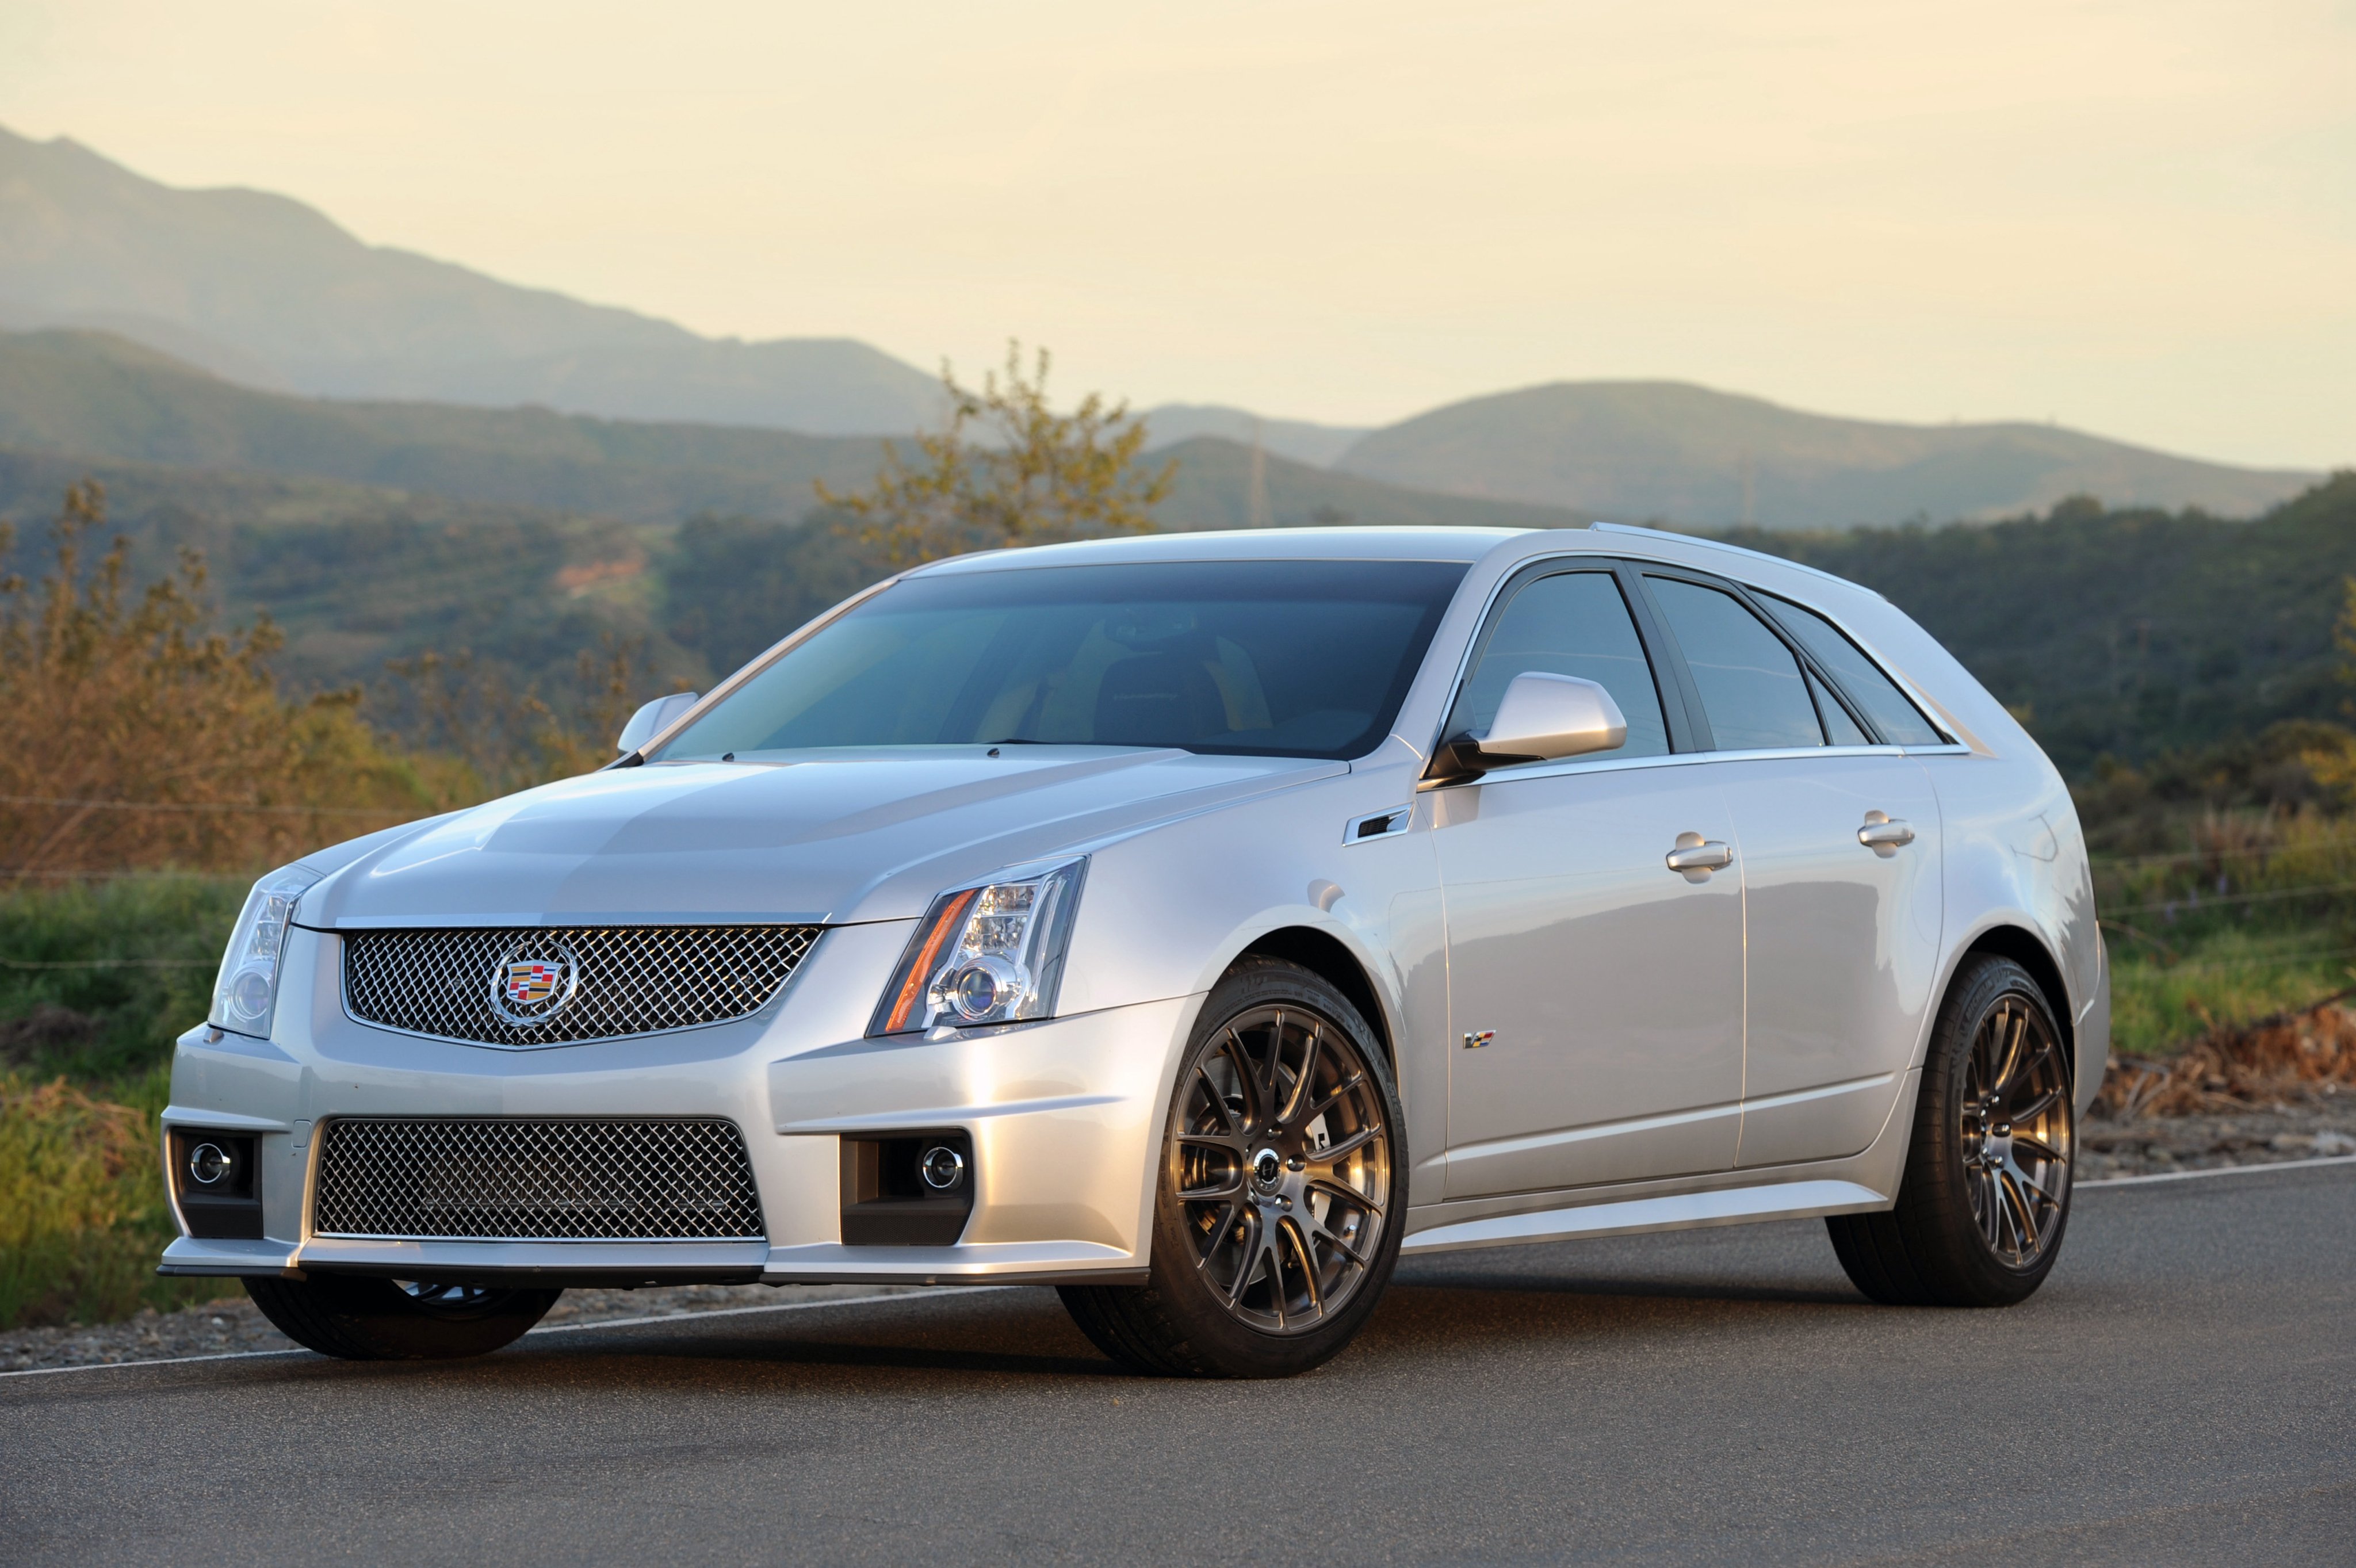 2012, Hennessey, Cadillac, Cts v, V650, Stationwagon, Muscle, Cts Wallpaper